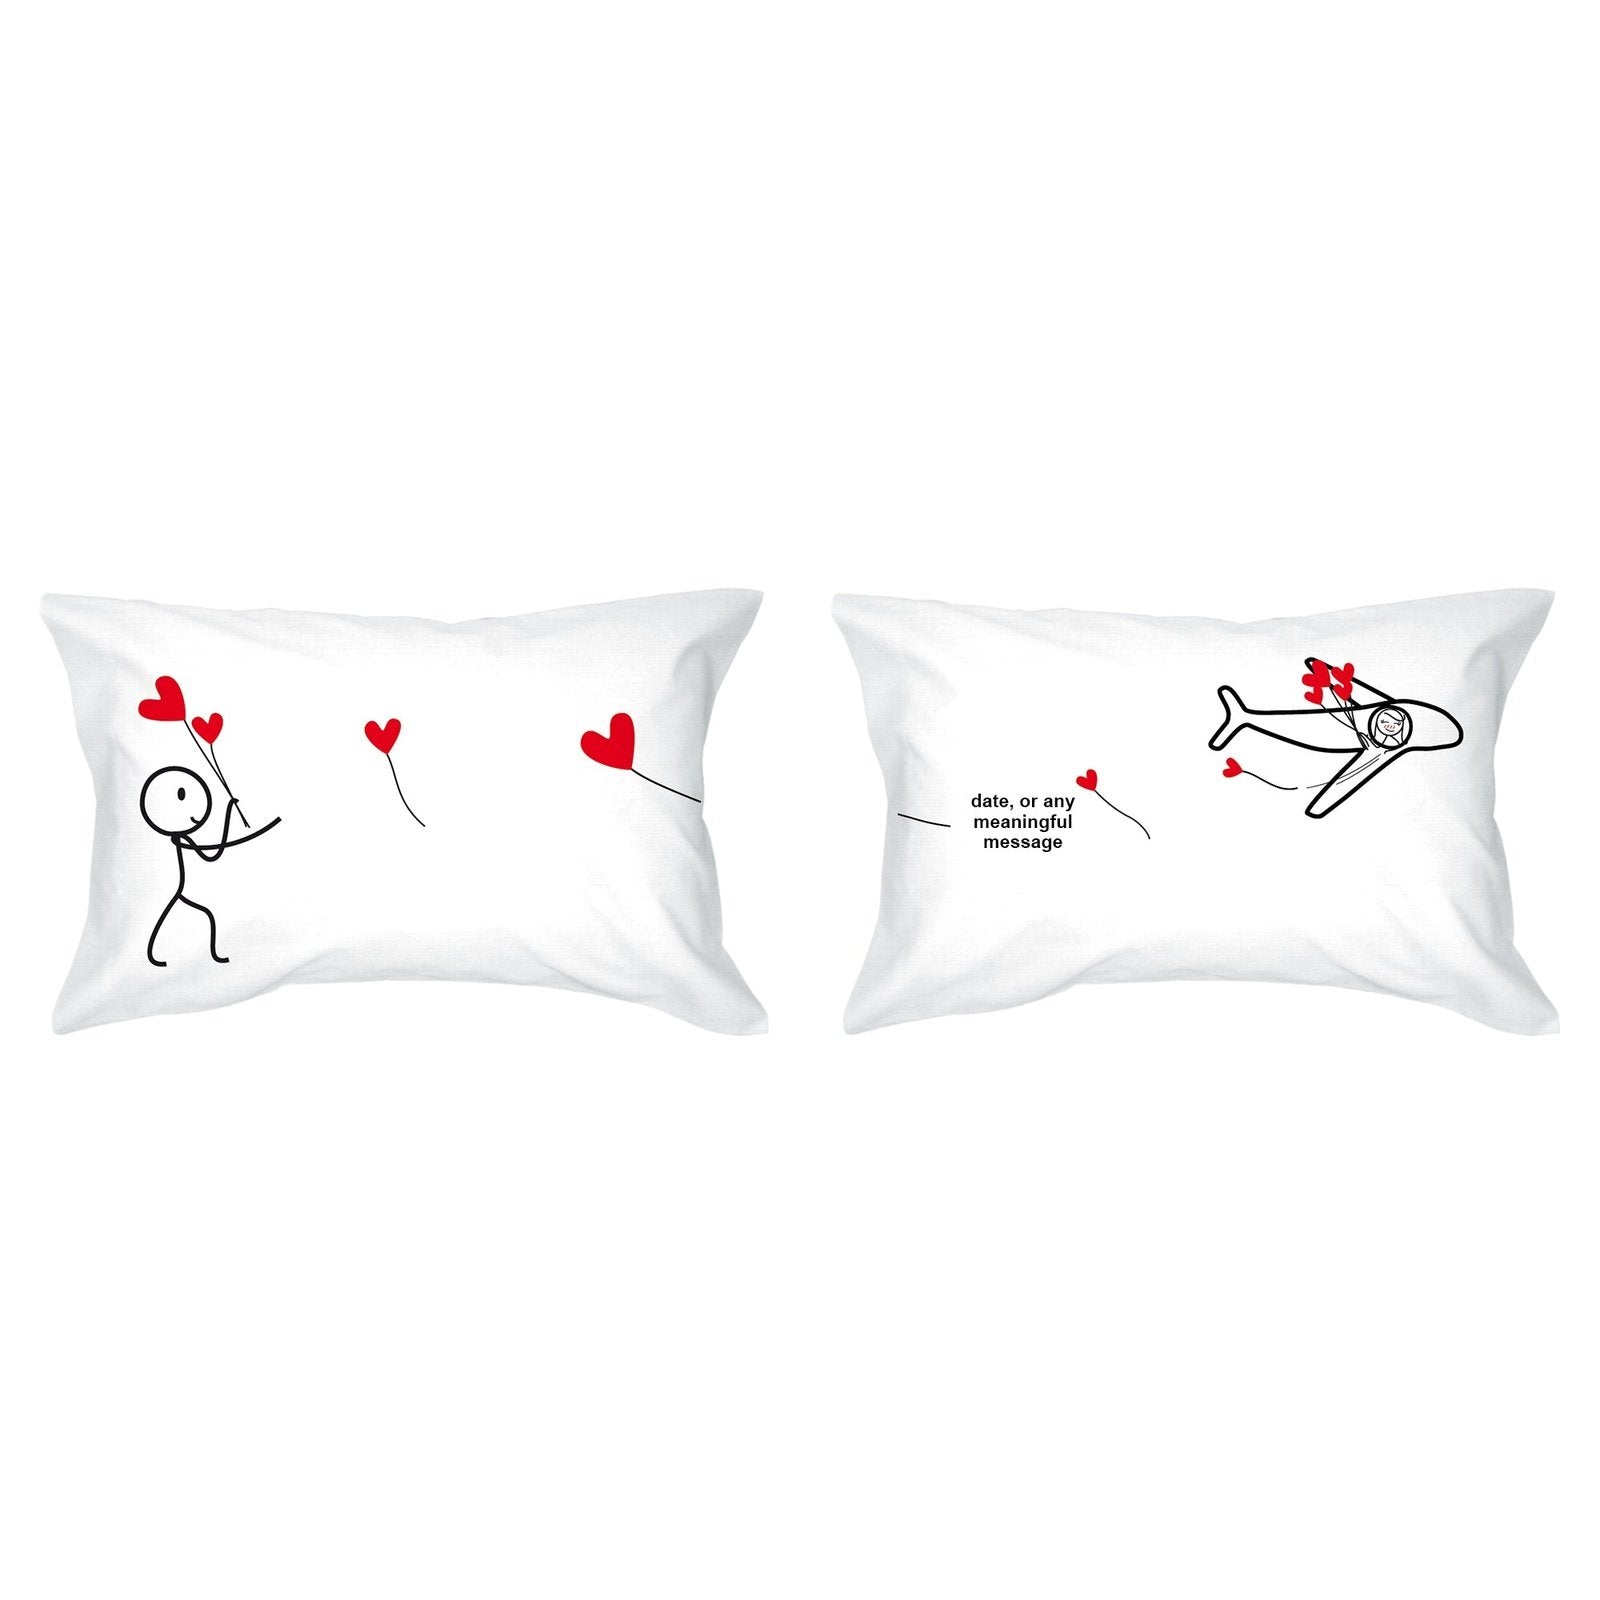 Celebrate love with these adorable hand-drawn pillows, perfect for couples, anniversaries, or as a thoughtful gift for him or her.